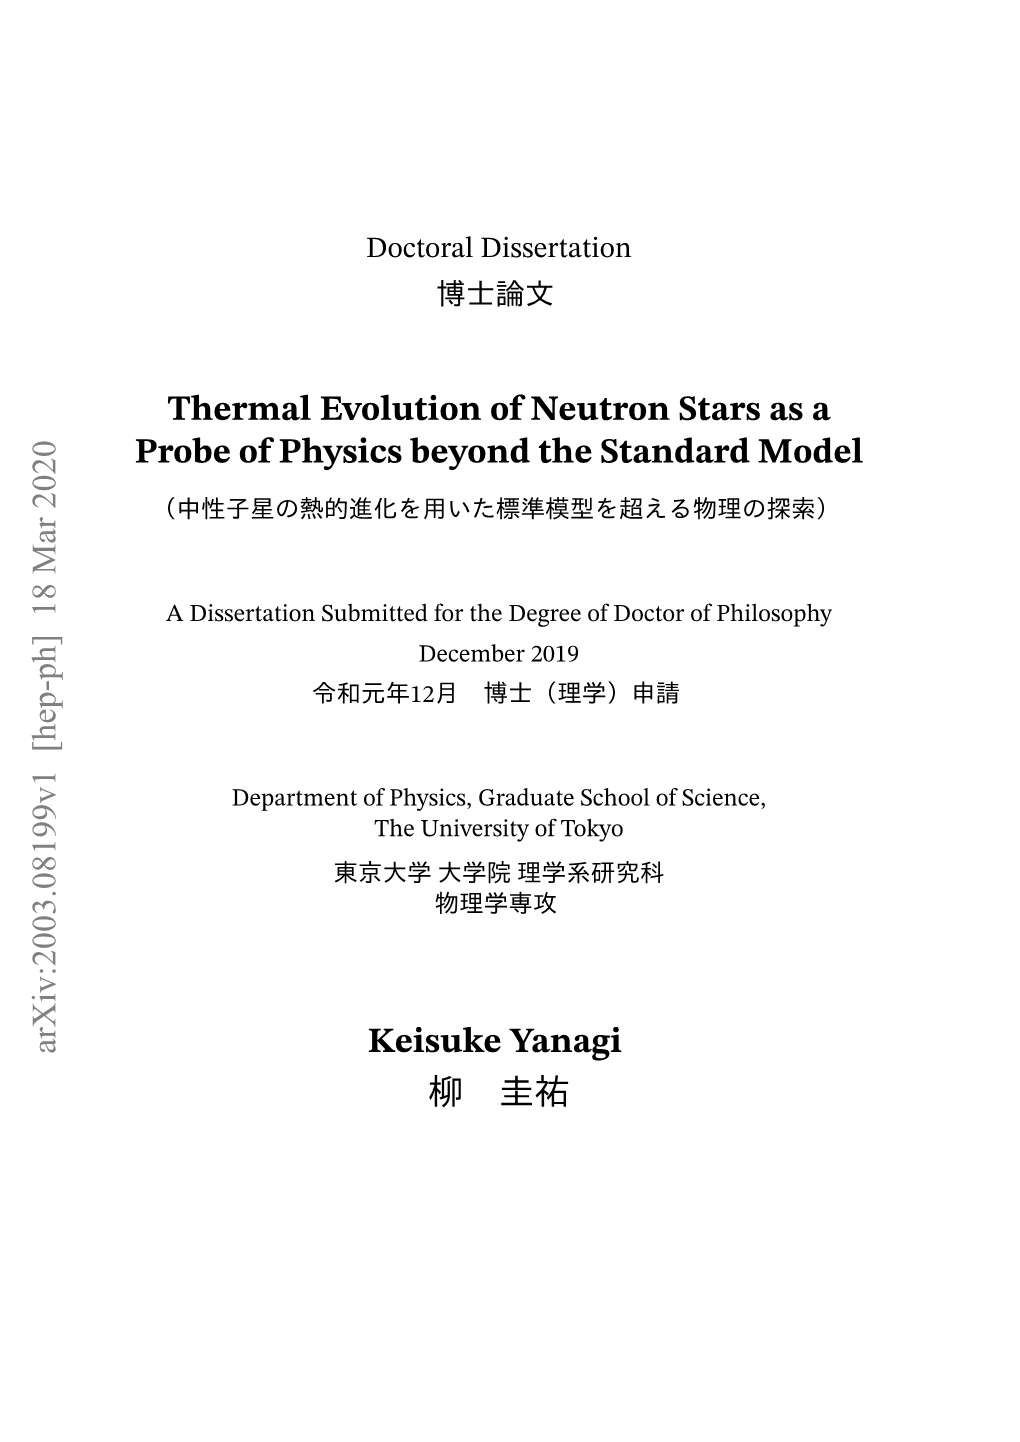 Thermal Evolution of Neutron Stars As a Probe of Physics Beyond the Standard Model